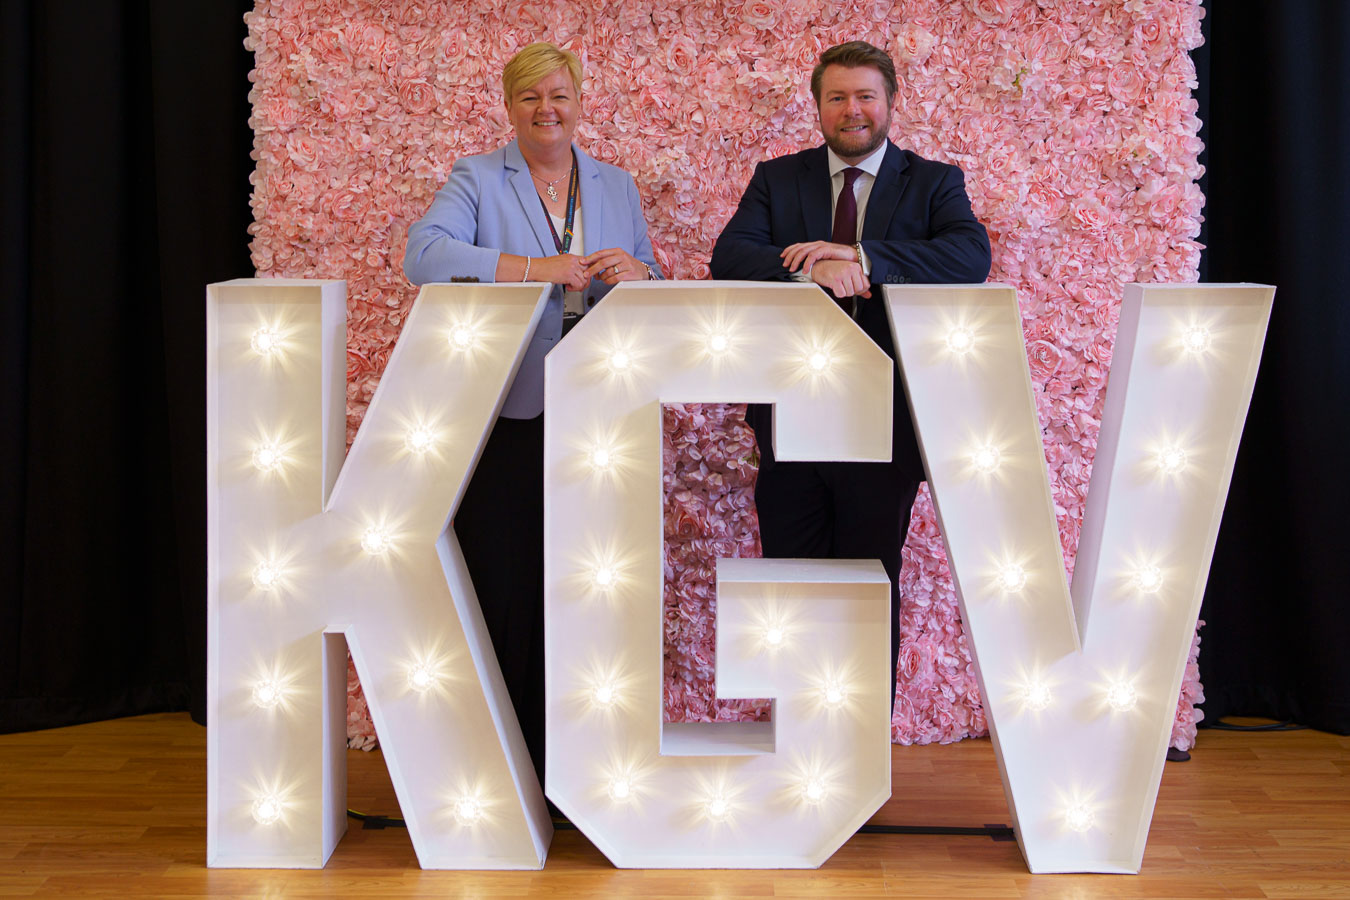 Southport MP Damien Moore is pictured with KGV Sixth Form College Principal and CEO Michelle Brabner, at the A-Levels celebration